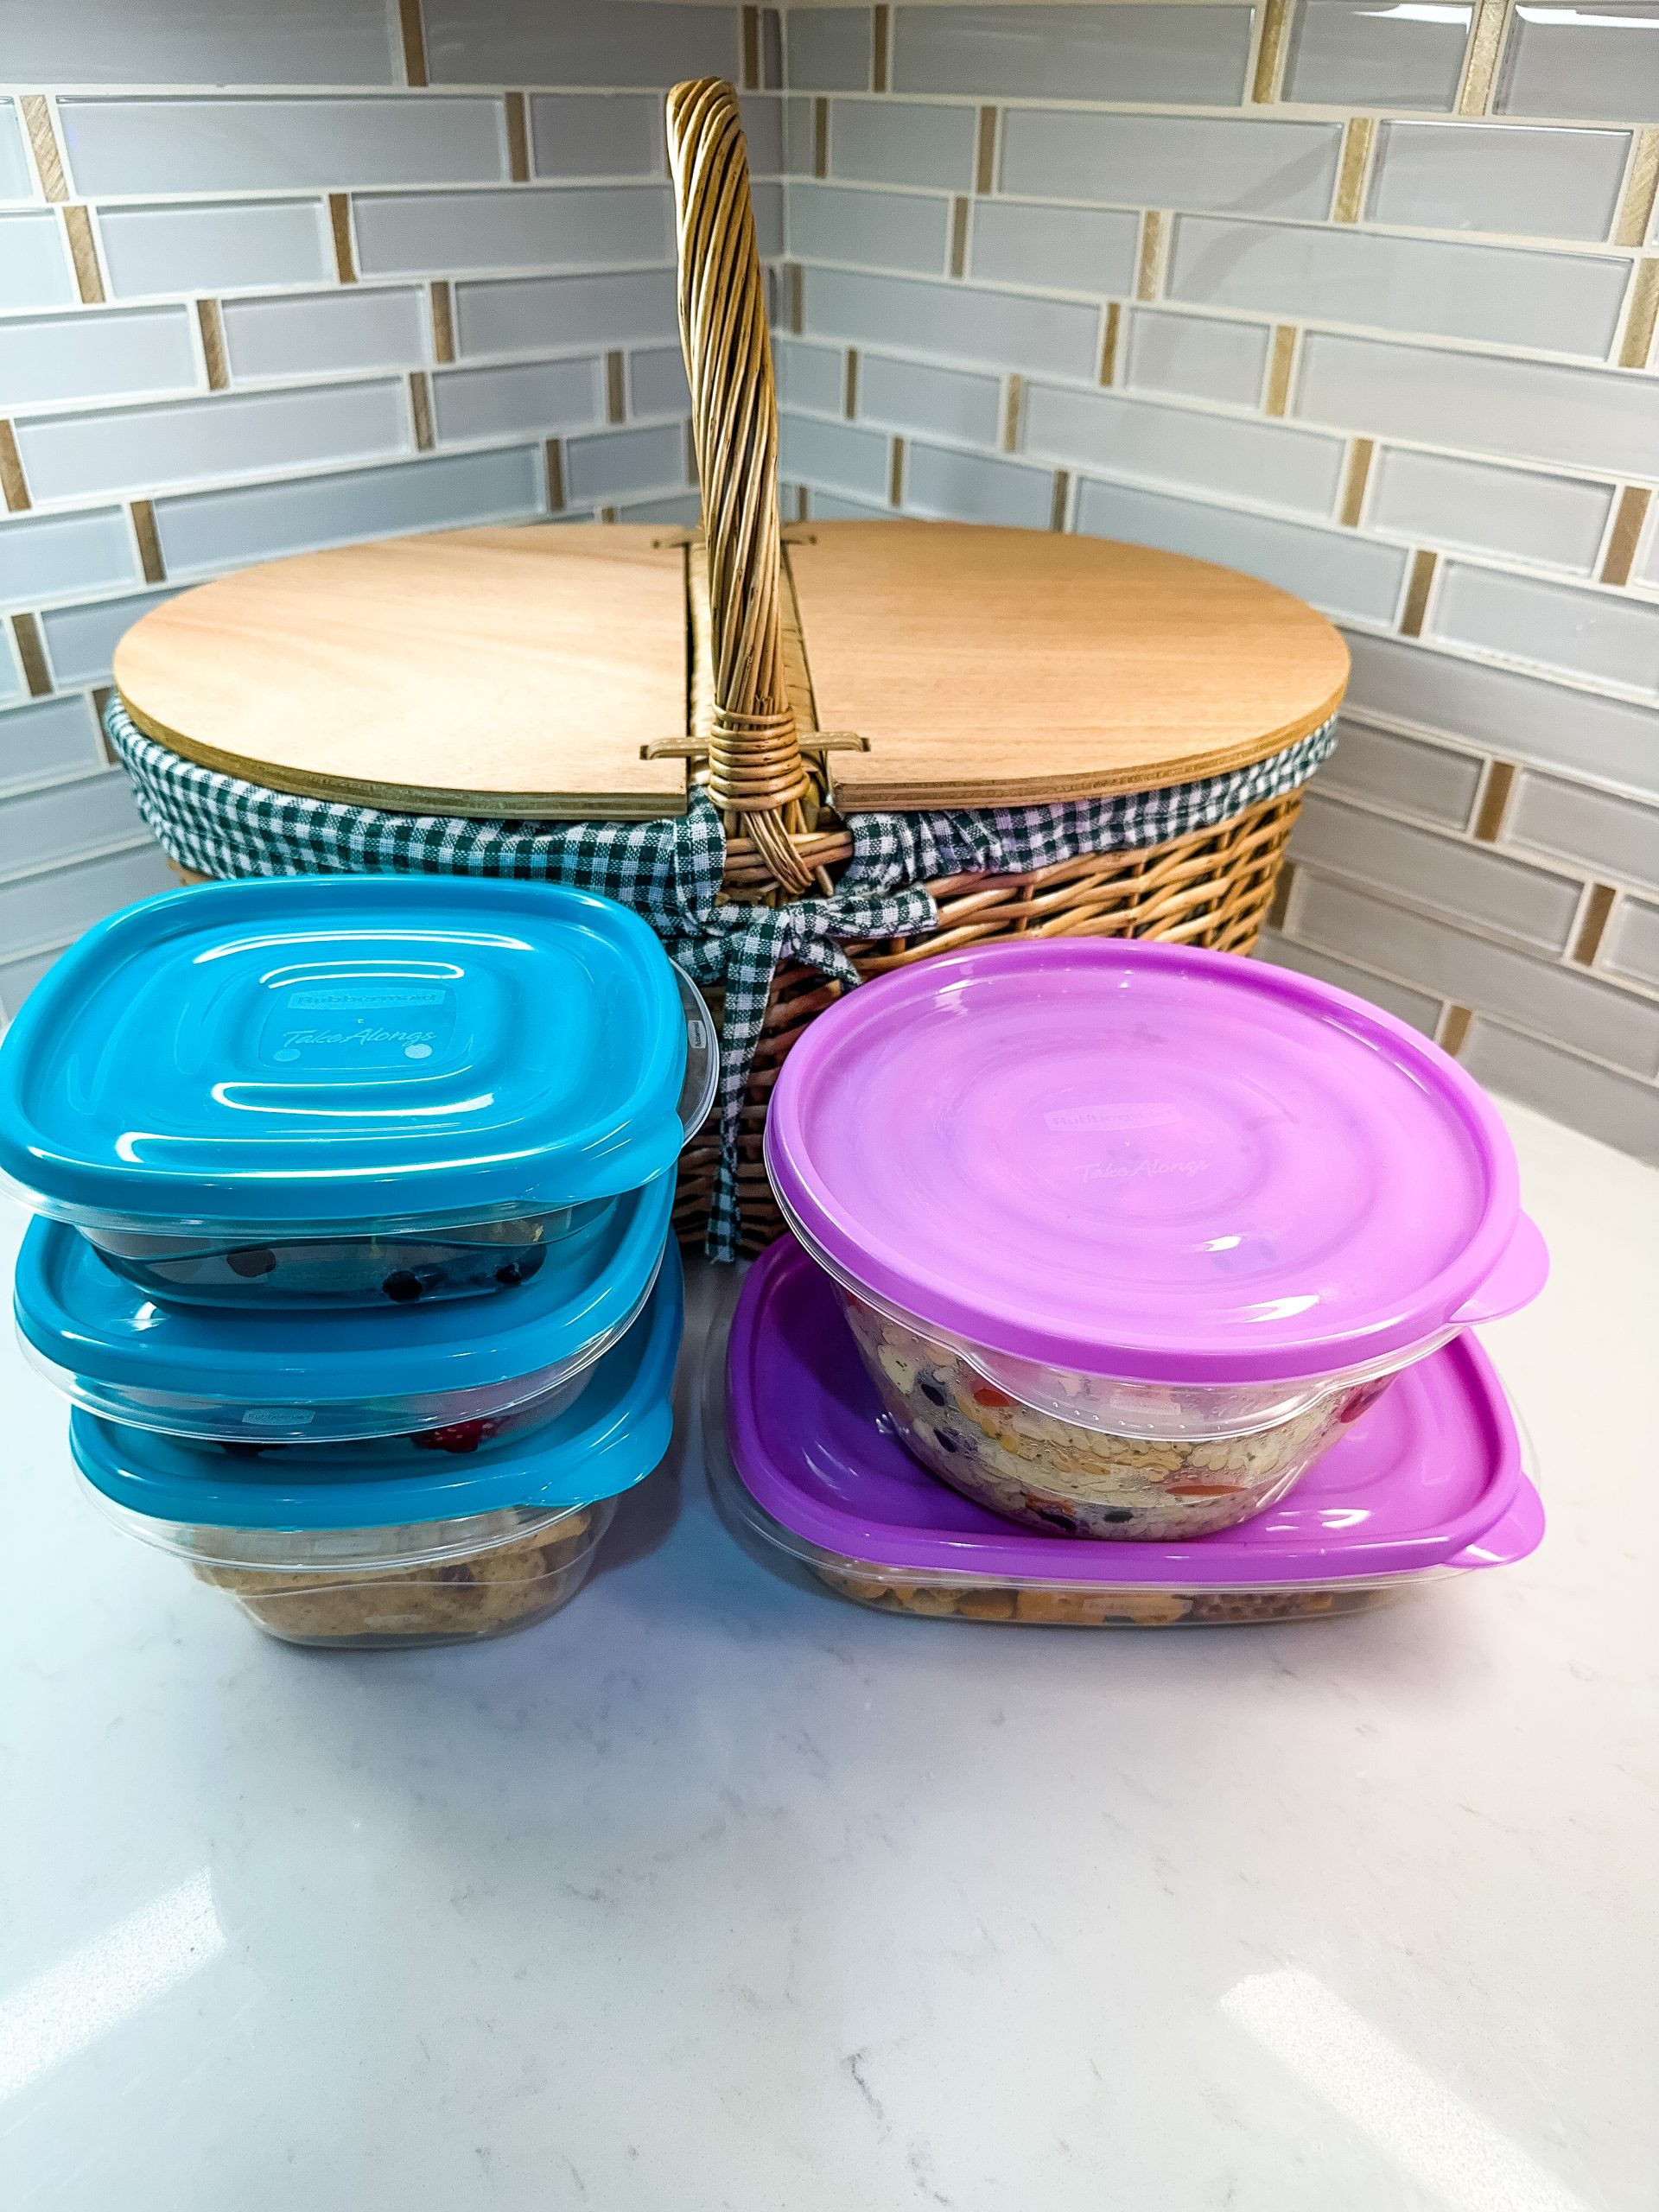 Prepping a Perfect Picnic Basket with Rubbermaid® TakeAlongs®